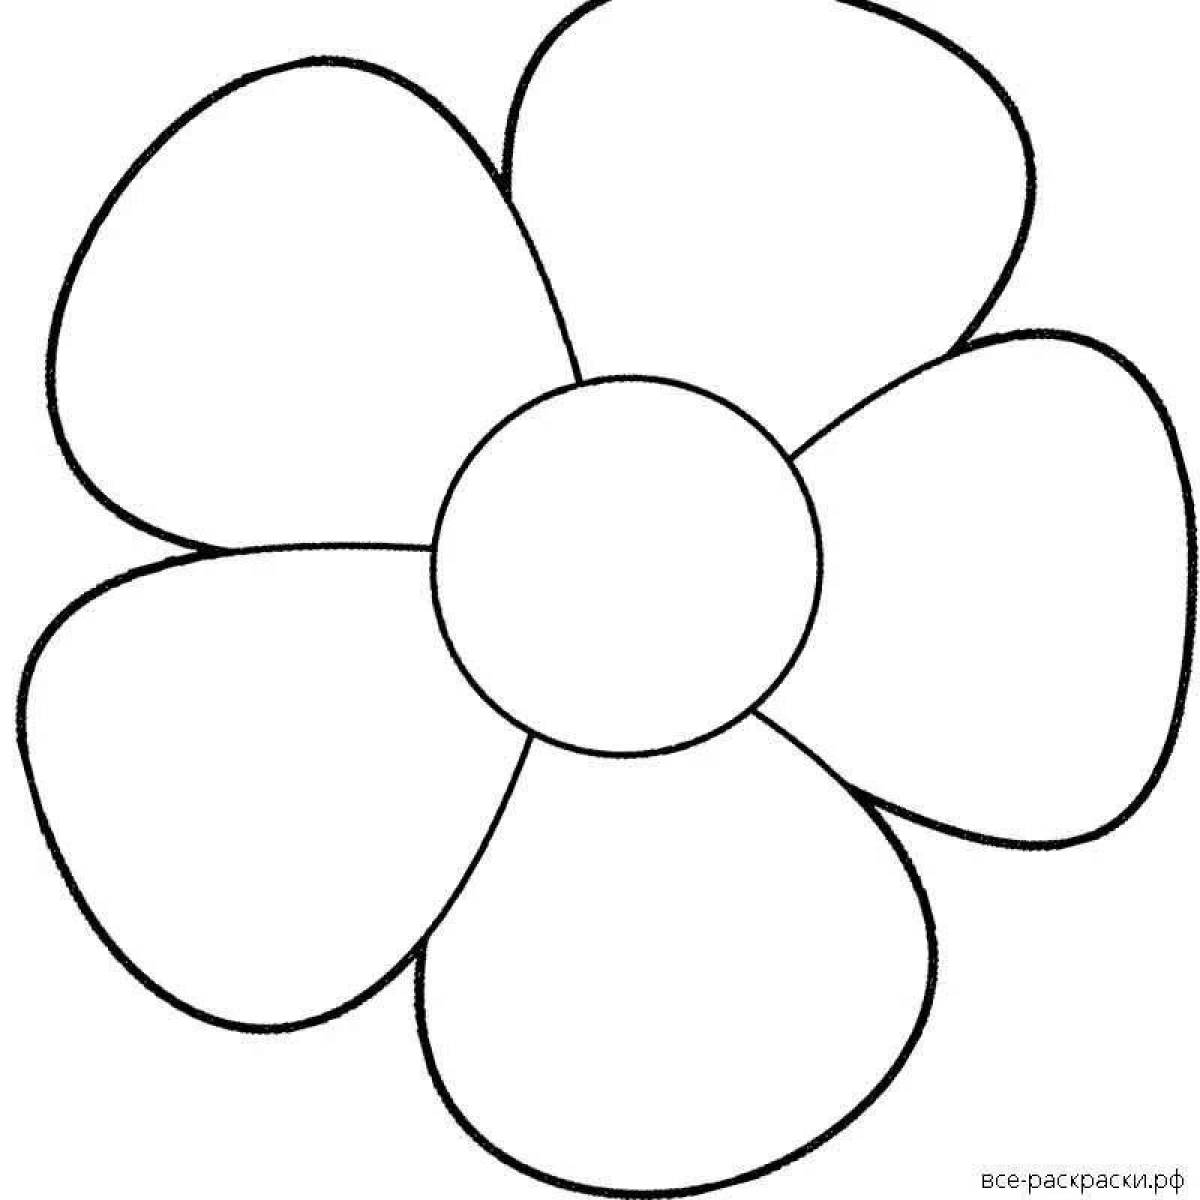 Coloring page delightful chamomile pattern